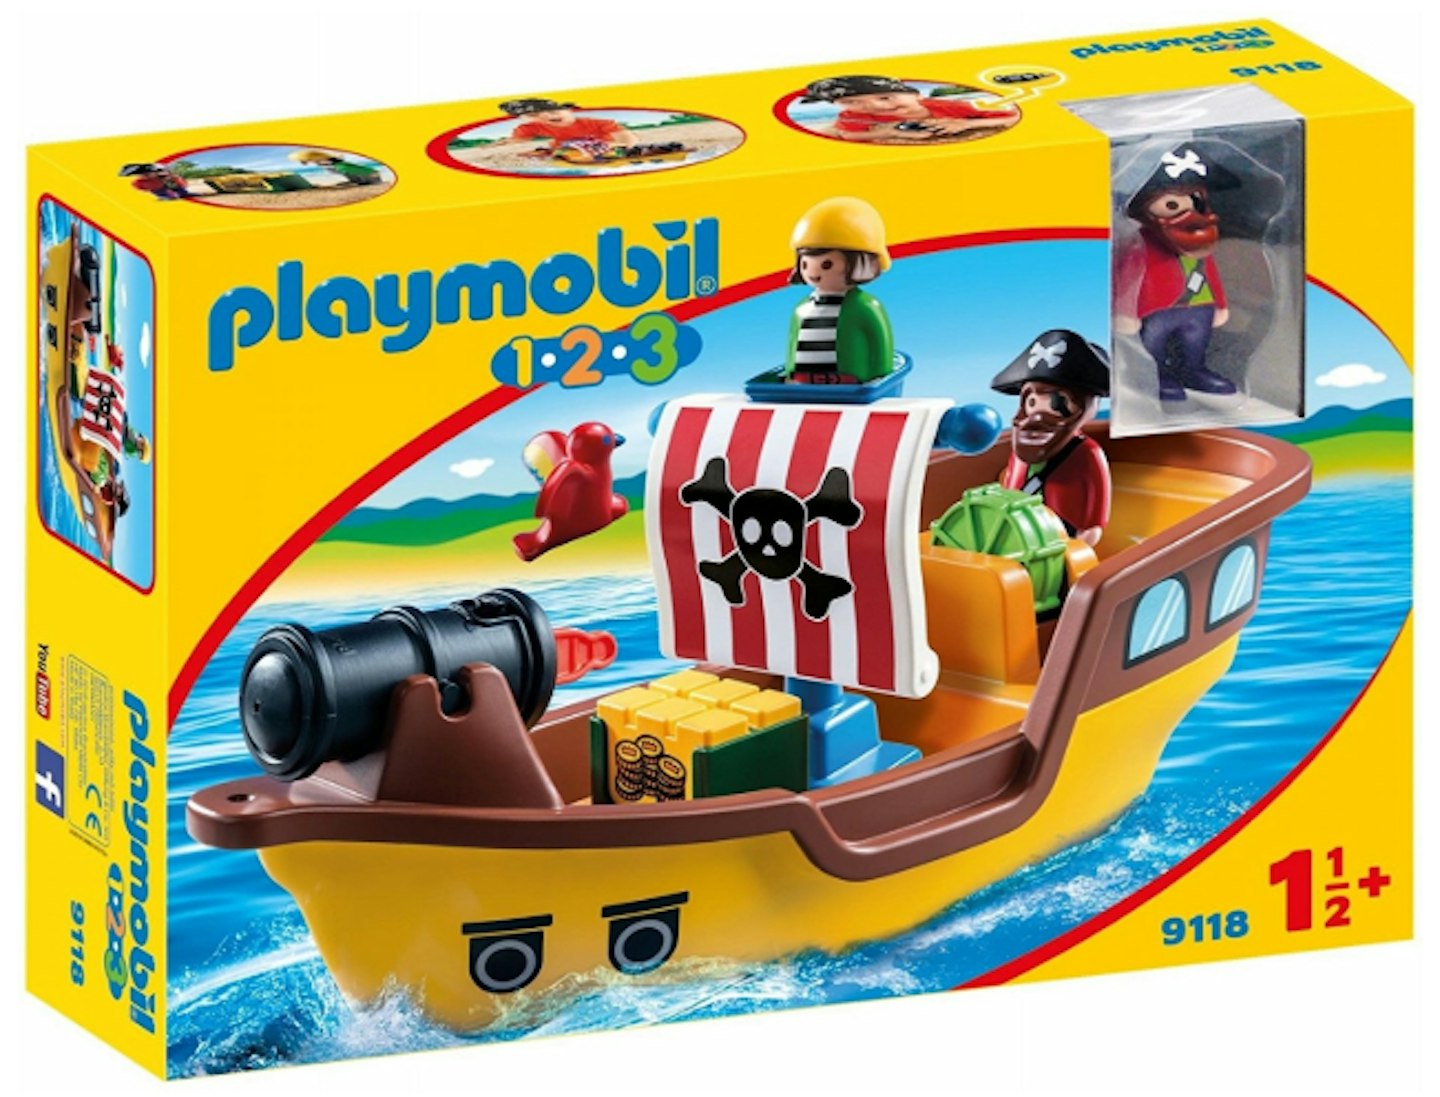 9118 1.2.3 Pirate Ship review